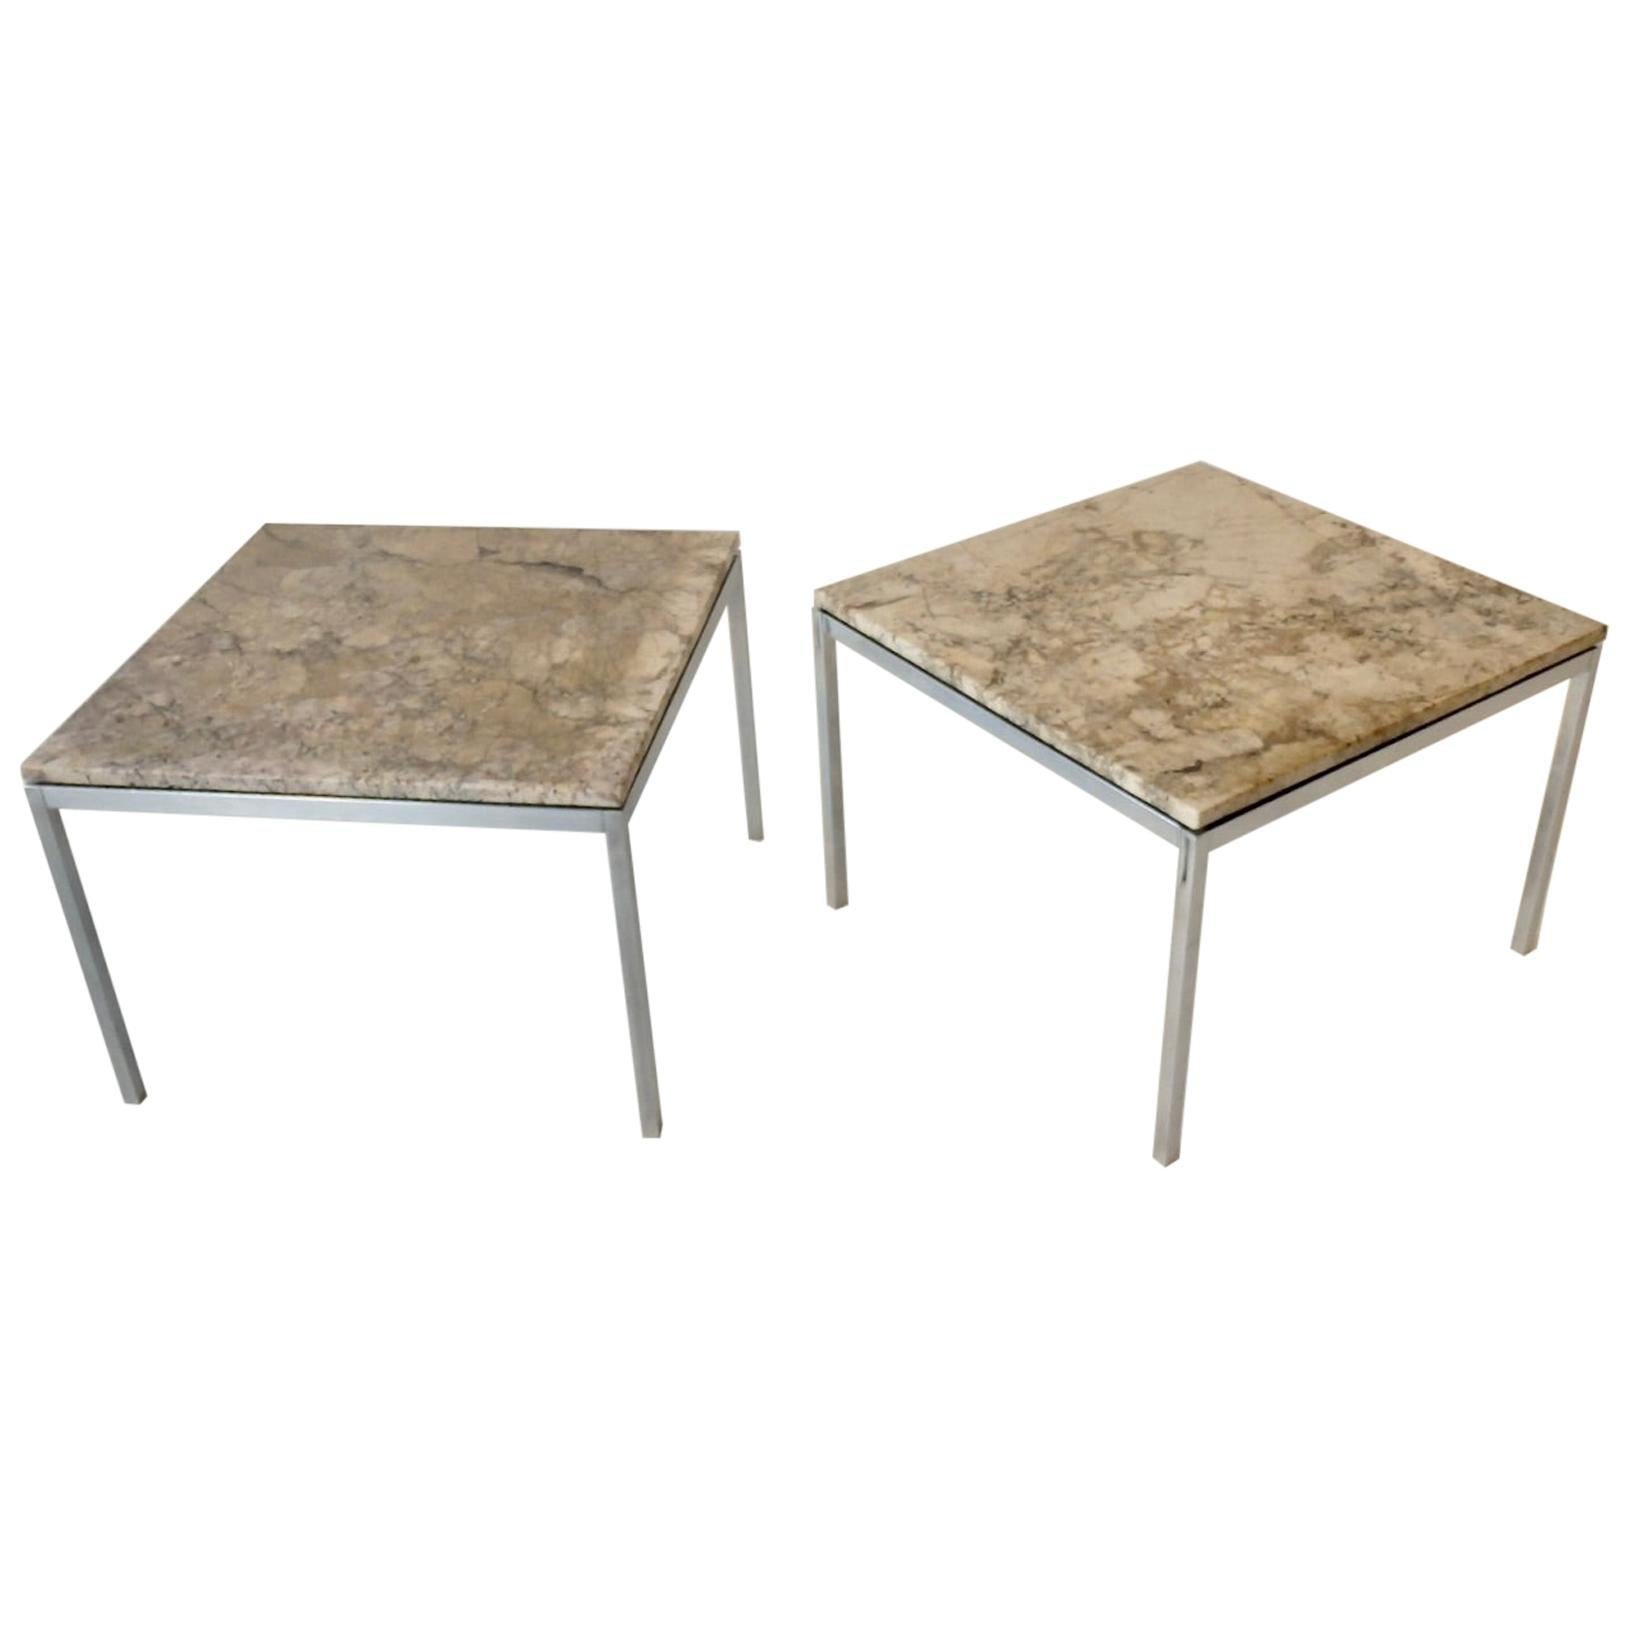 Two Exotic Stone Top Florence Knoll Side Tables One Chrome One Satin Finish Base For Sale